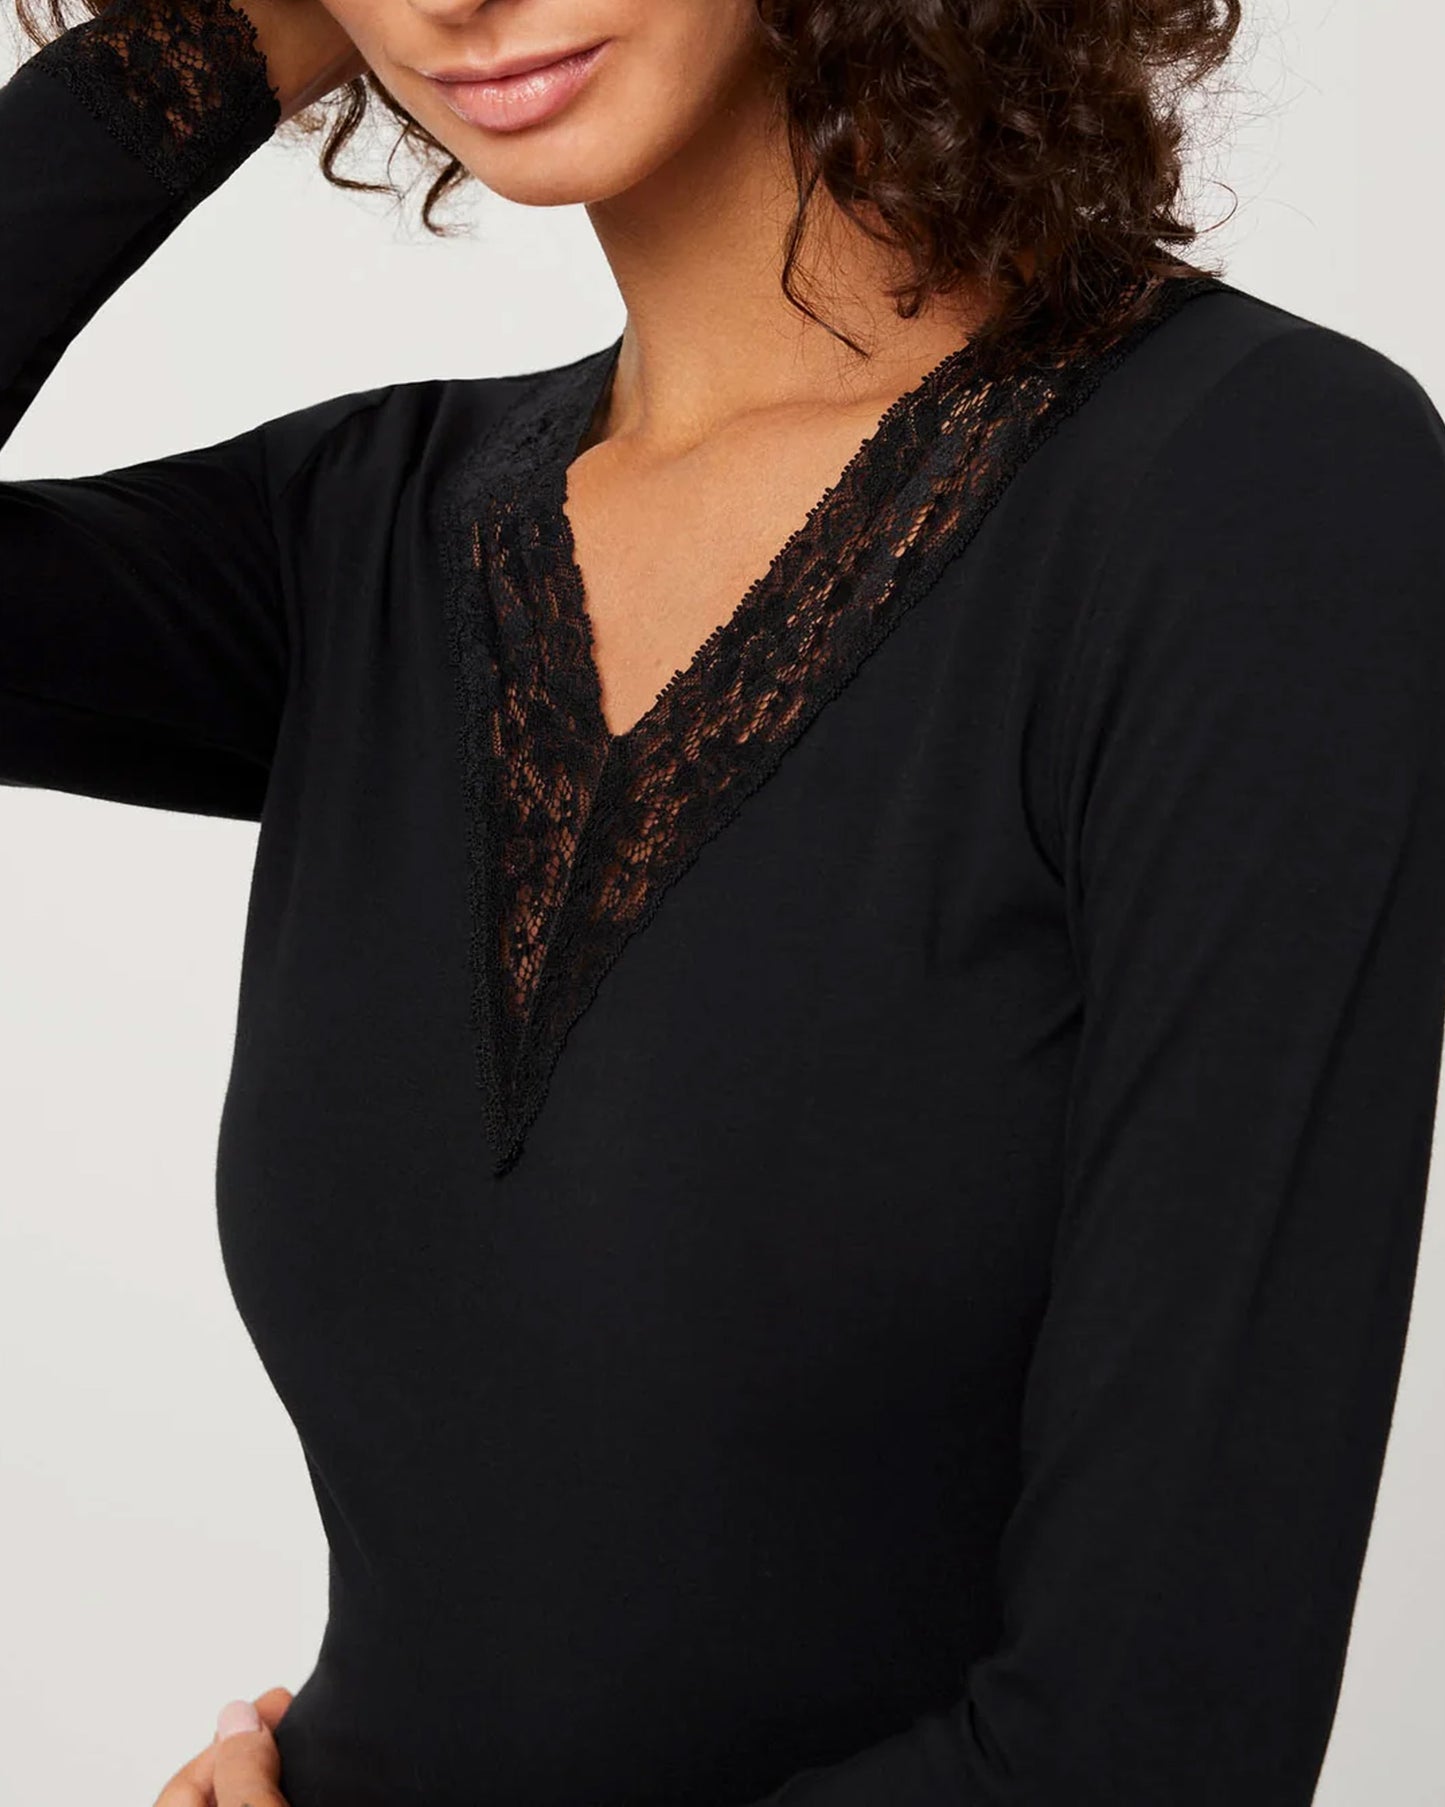 Ysabel Mora 19532 Lace Trim Top - Soft and light long sleeved black cotton top with a lace trim v-neck and floral lace trim cuffs.